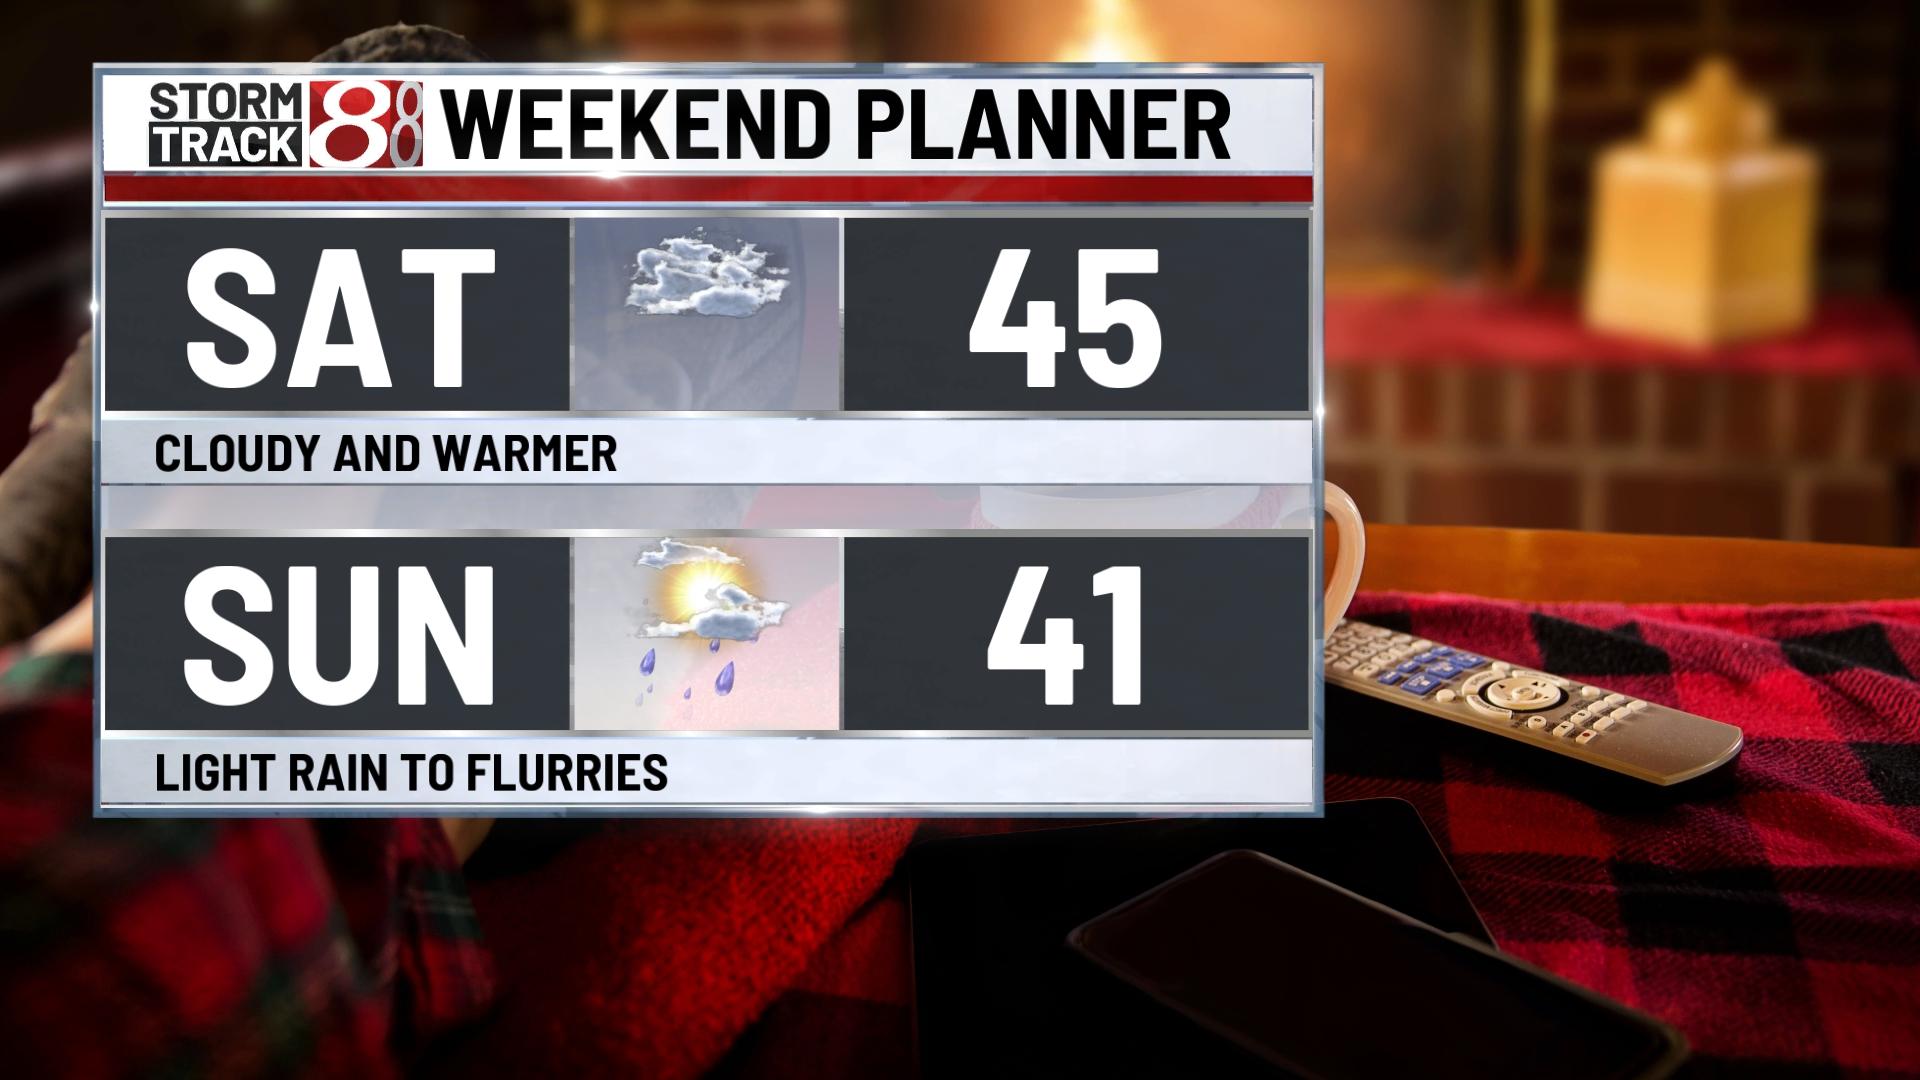 Warmer weekend with a few shower chances